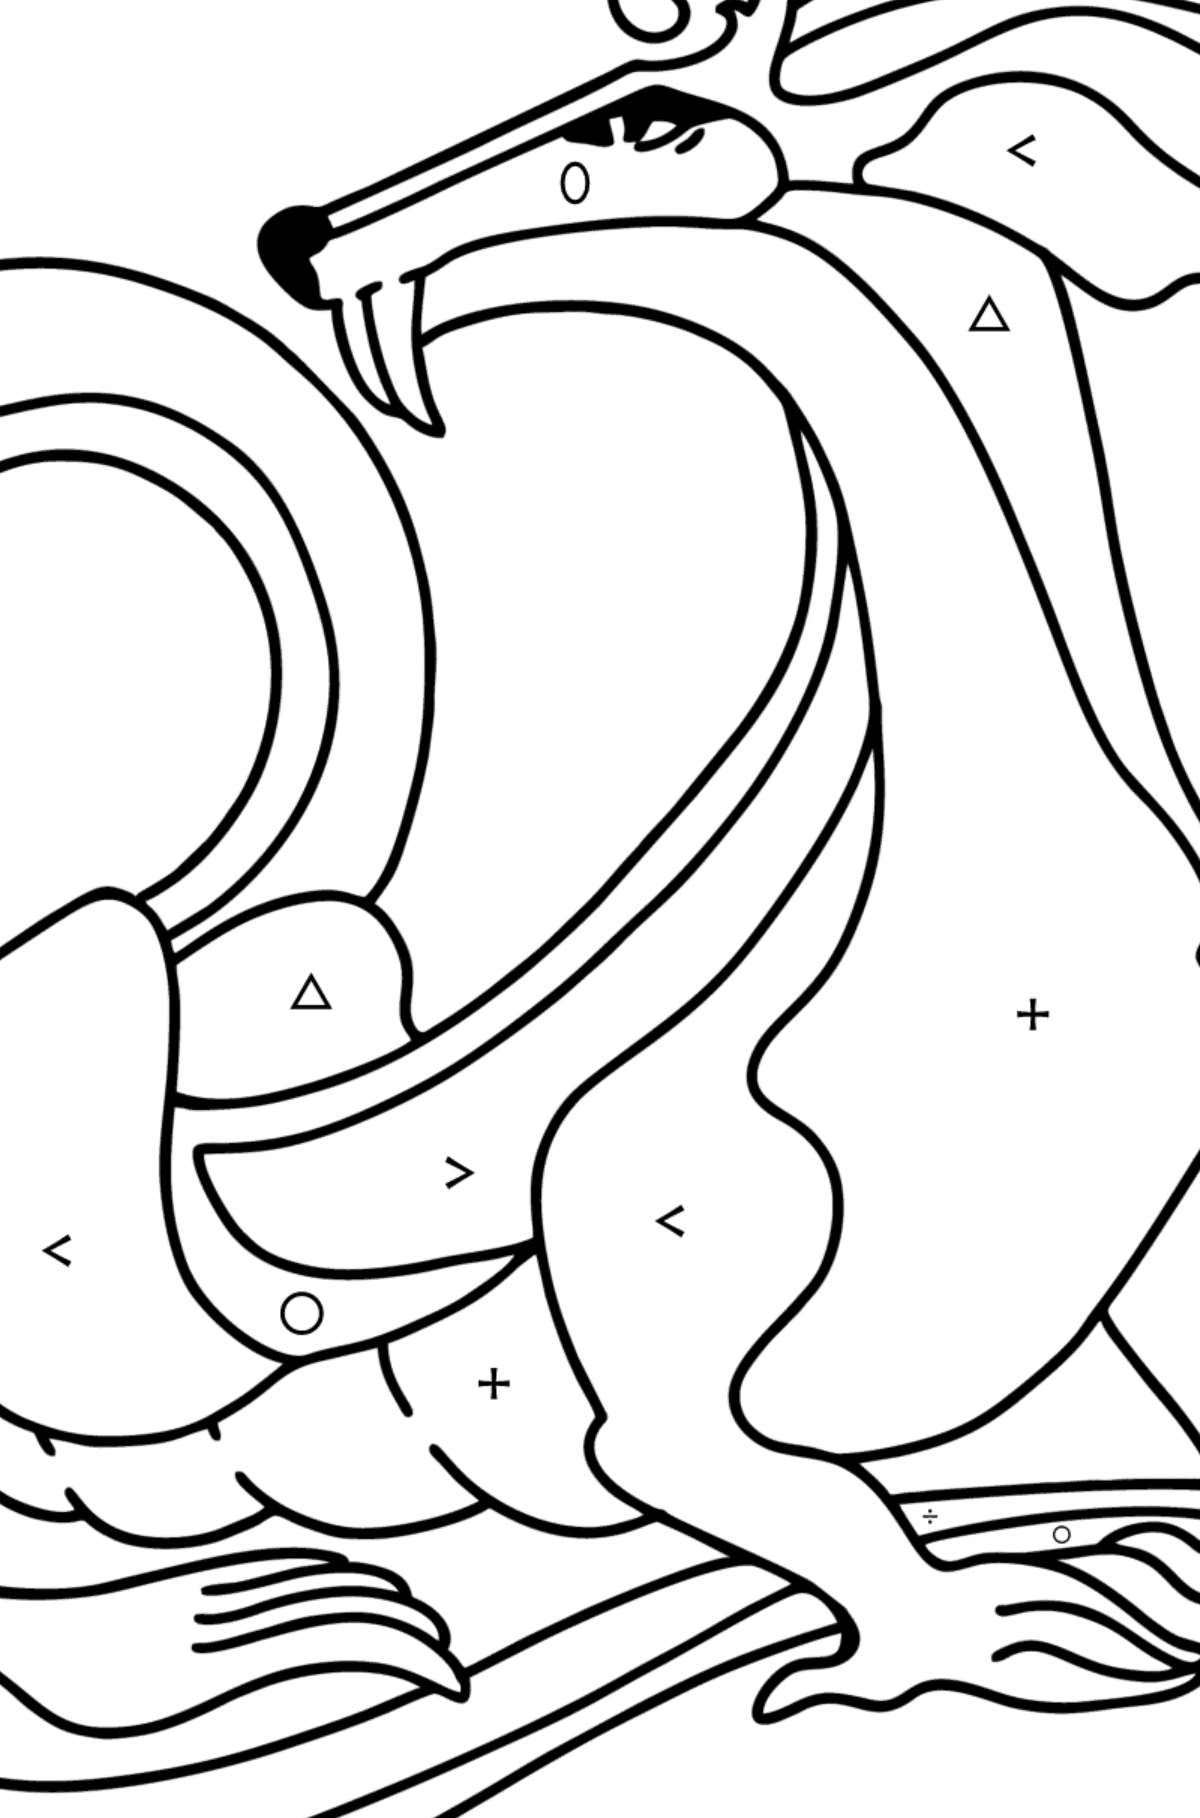 Calm Dragon coloring page - Coloring by Symbols and Geometric Shapes for Kids